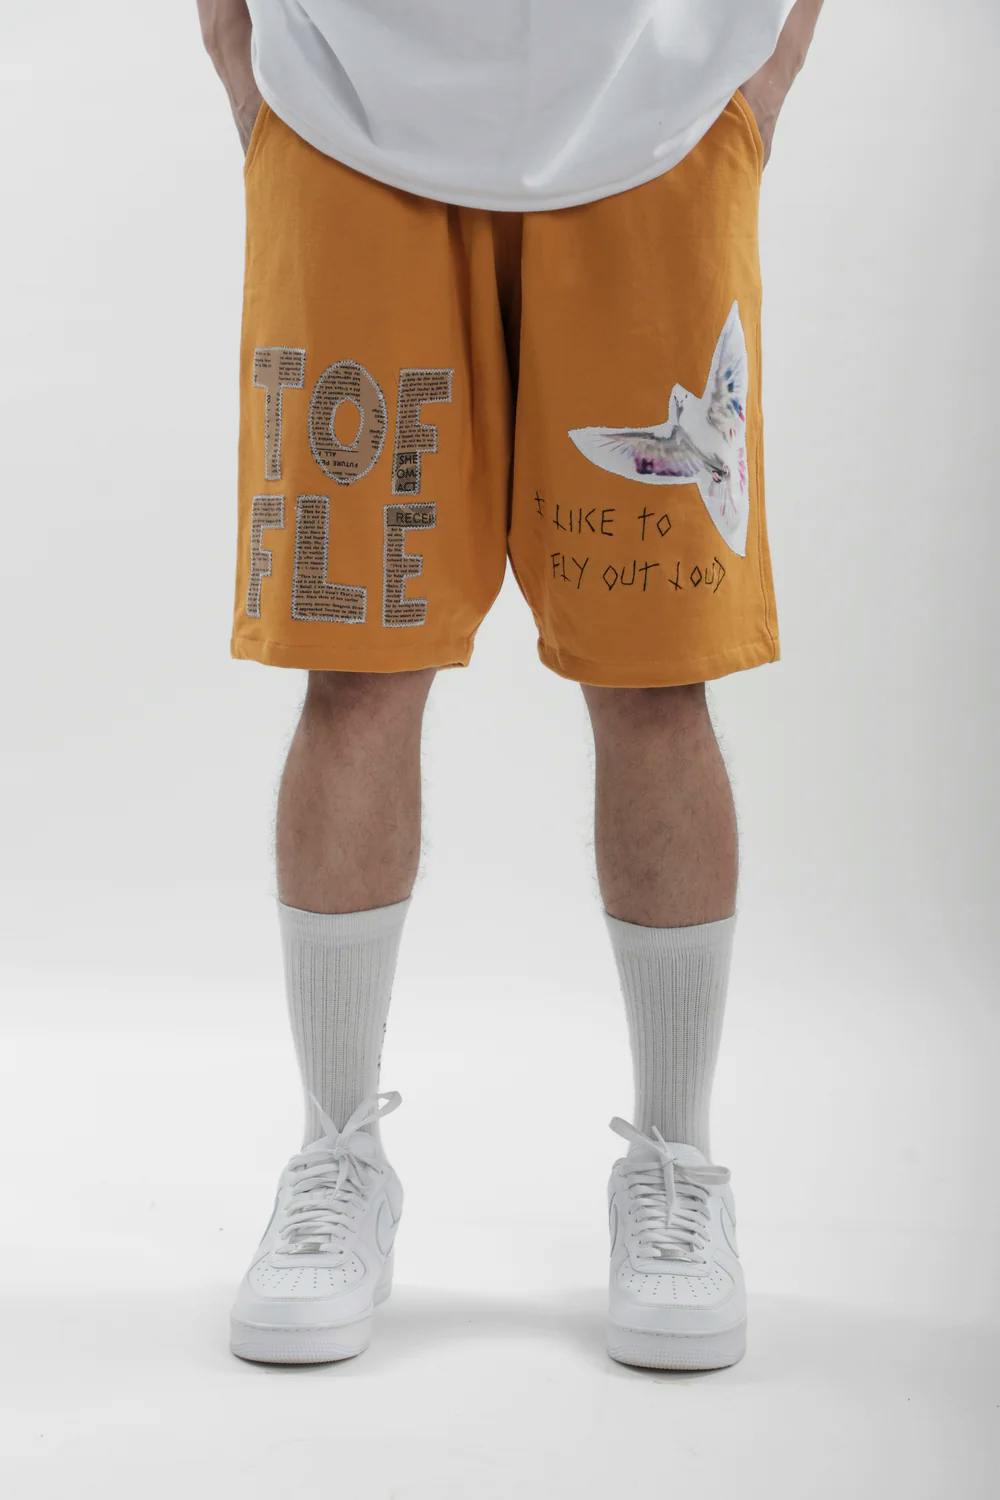 Flying Out Loud Shorts, a product by TOFFLE